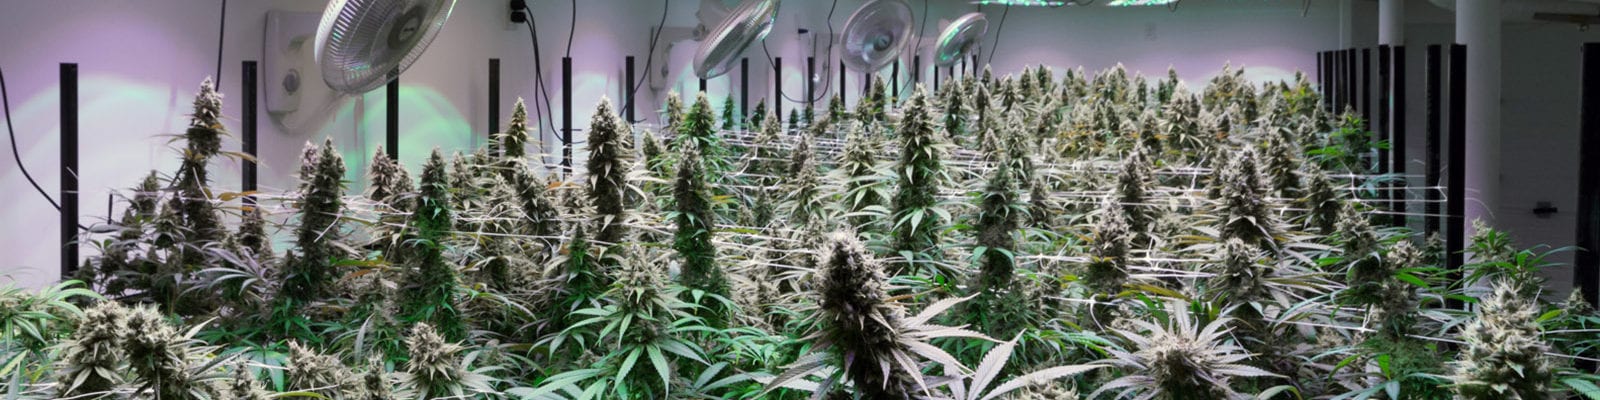 A large, indoor cannabis grow operation.